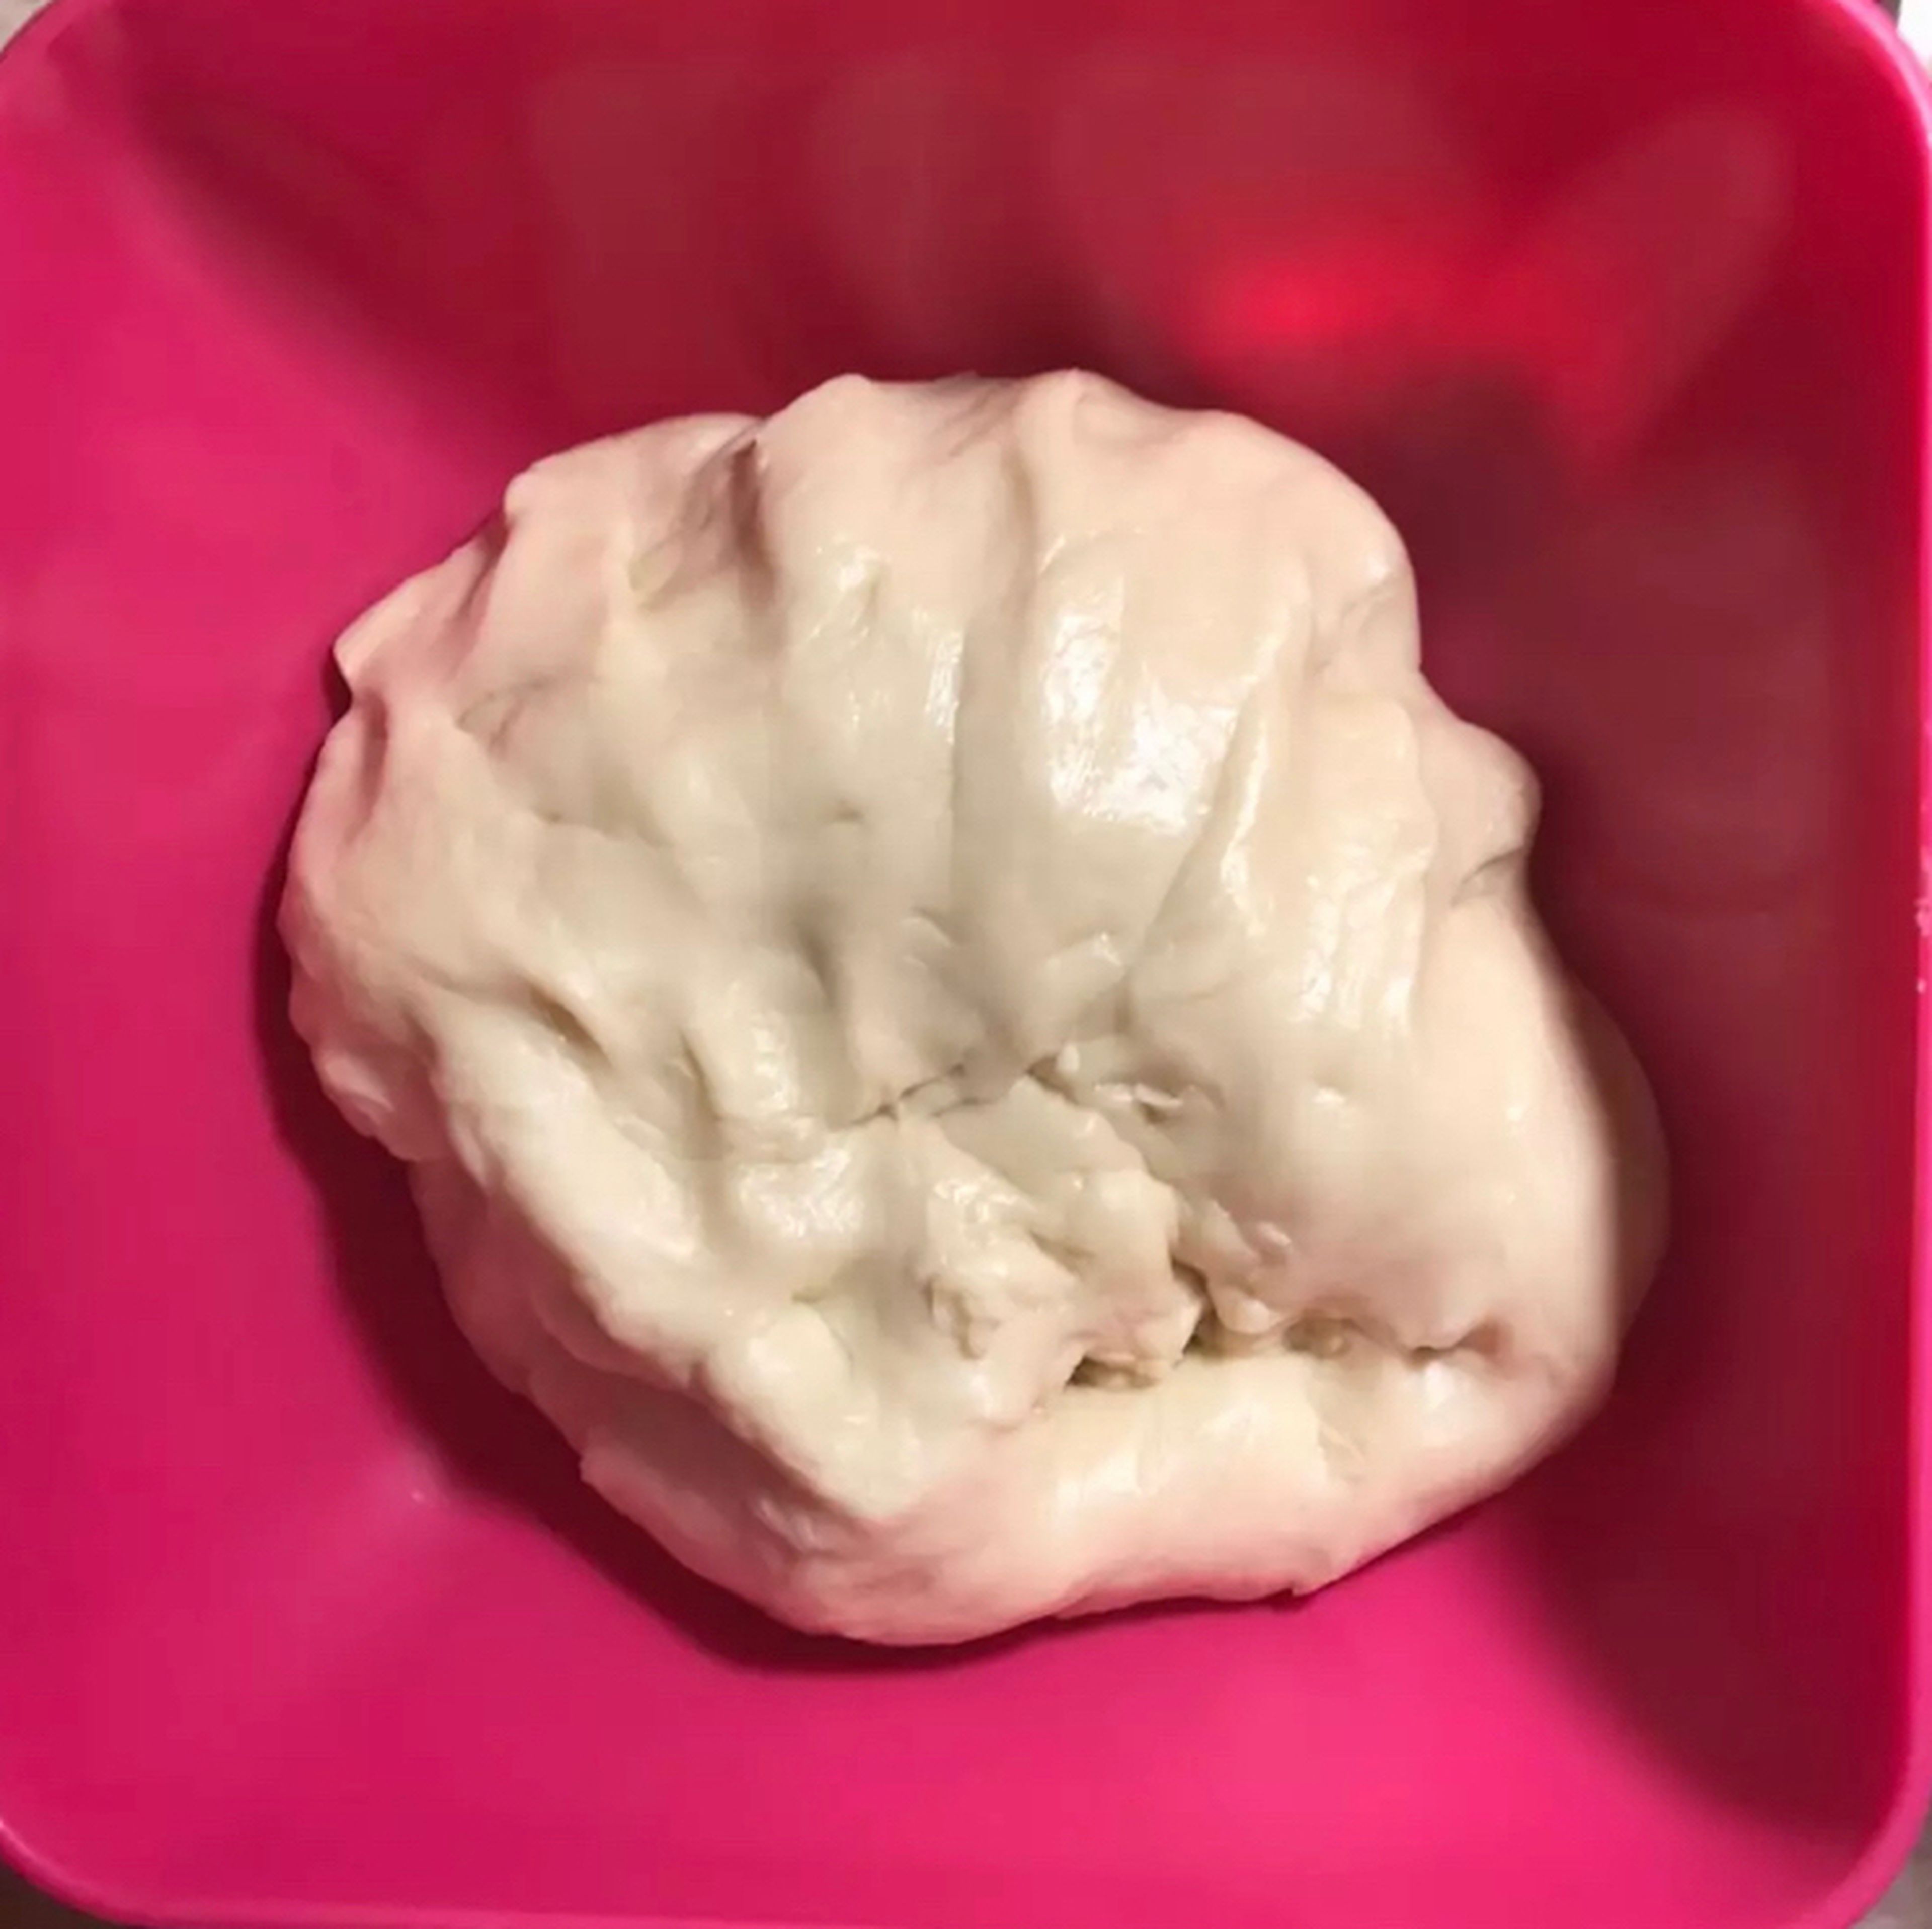 Mix 4 cups of flour, 3/4 cup of oil, 1/4 cup of sugar and water in a large bowl and knead until a smooth dough is obtained. Cover the dough and set aside to prepare the filling.